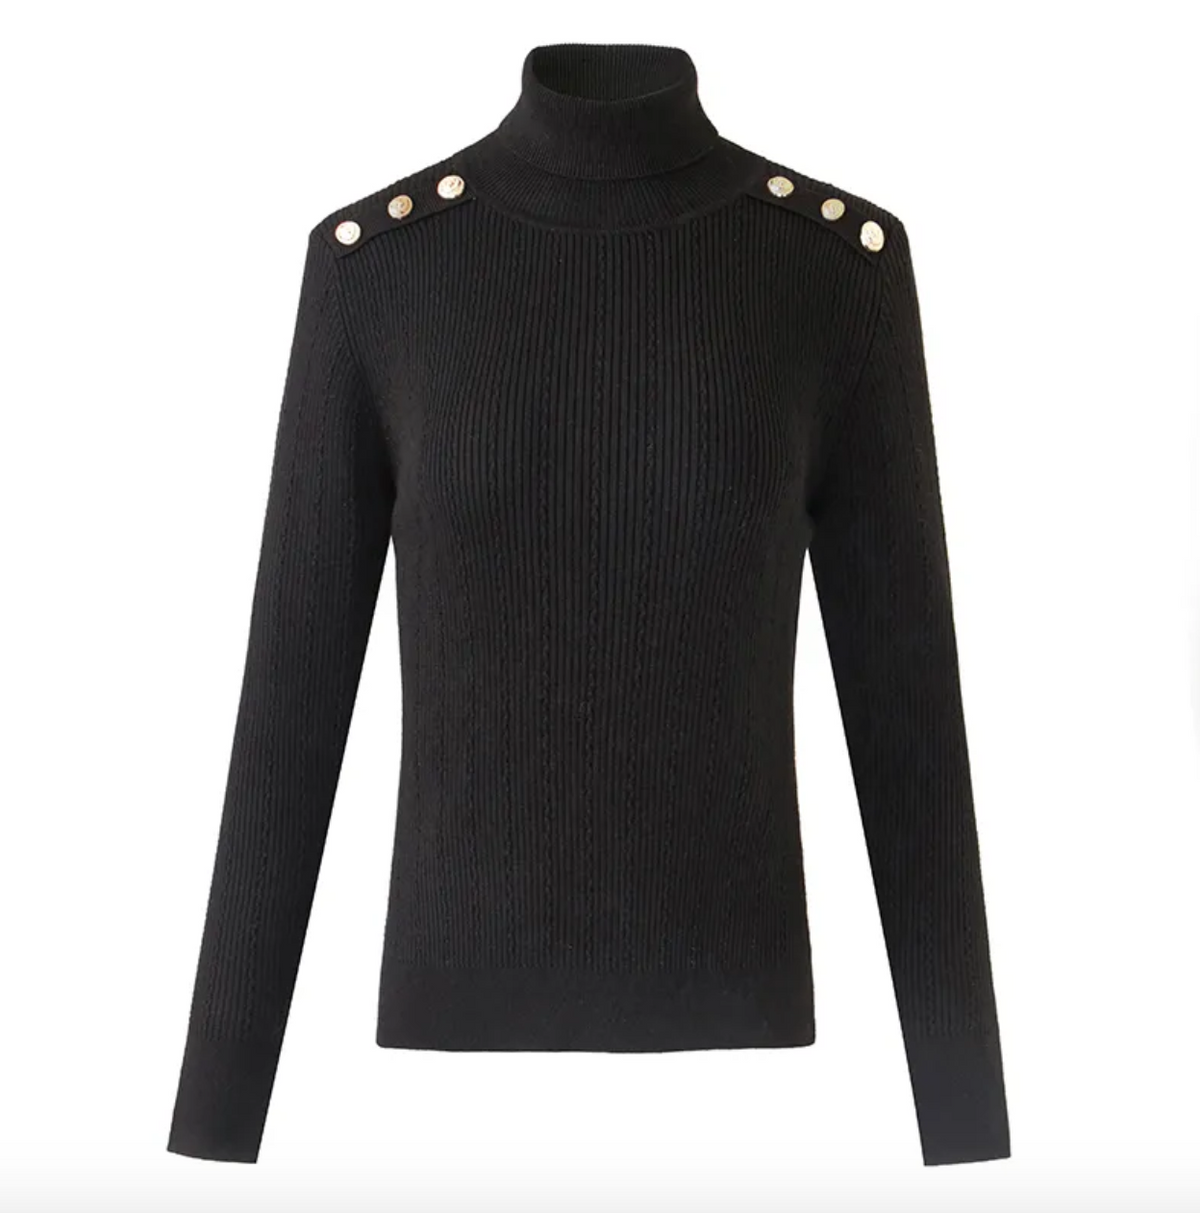 balmain inspired button detailed rollneck sweater is a sexy and sophisticated jumper made from soft ribbed knit, medium stretch fabric with beautiful button detailing. This turtleneck sweater is available in a series of colours and can be worn either casually or dressed up! 